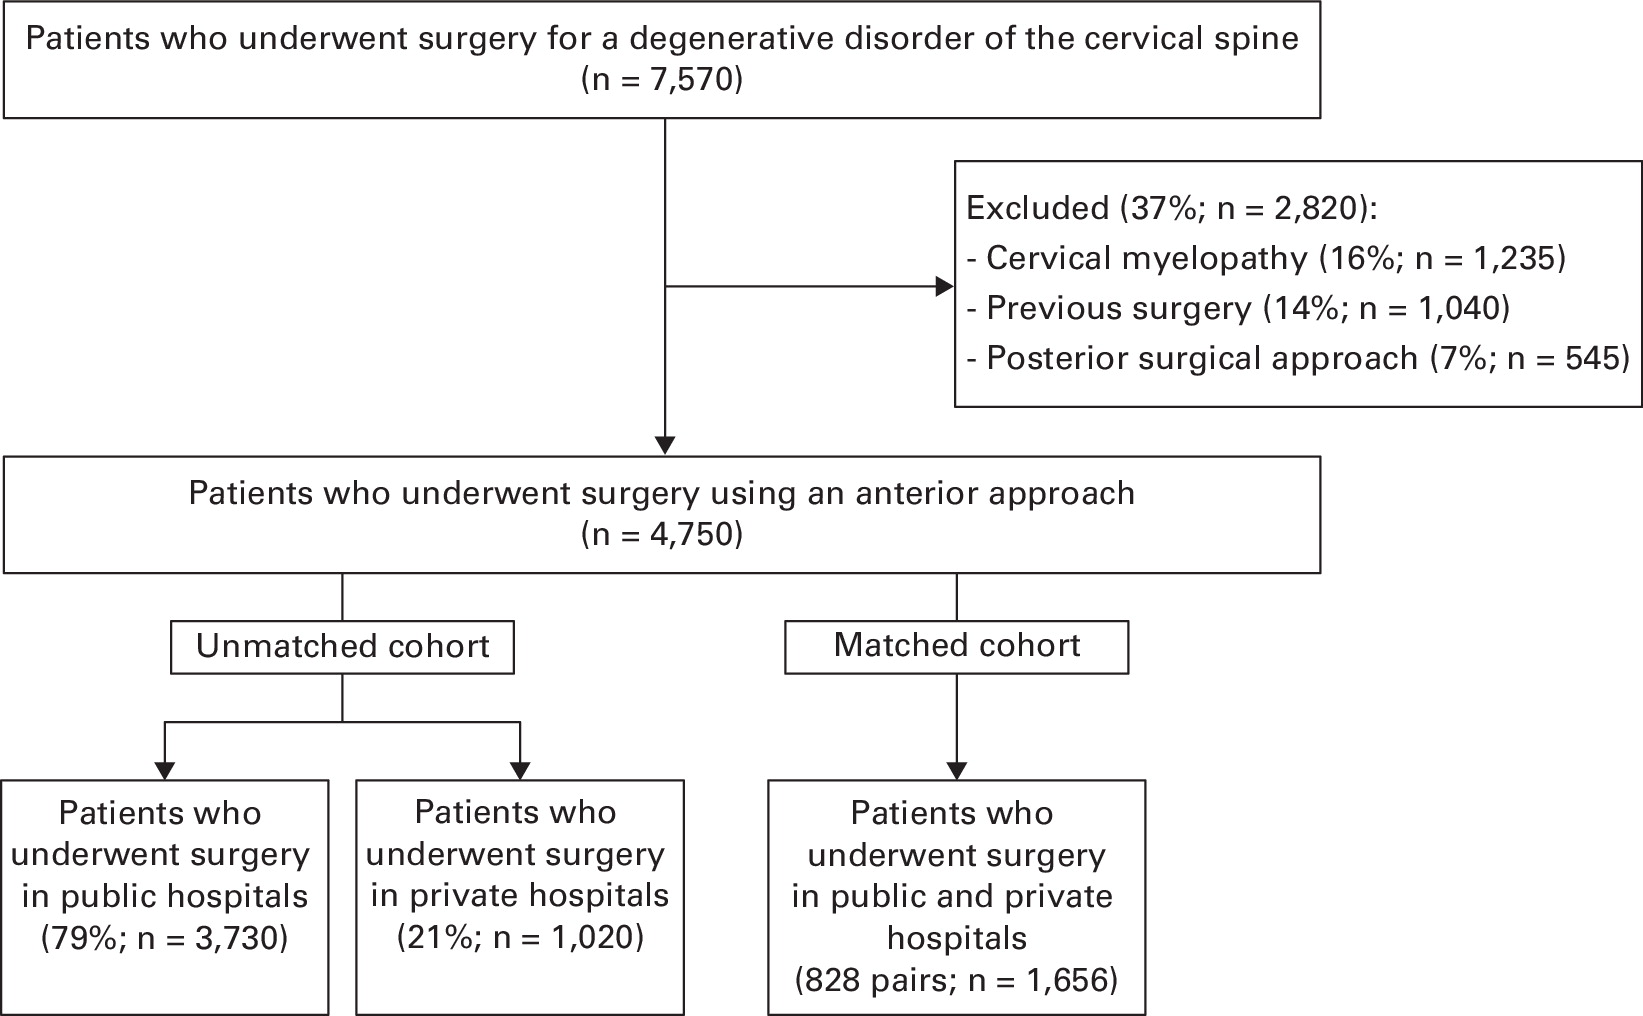 Clinical outcomes after surgery for cervical radiculopathy performed in public and private hospitals